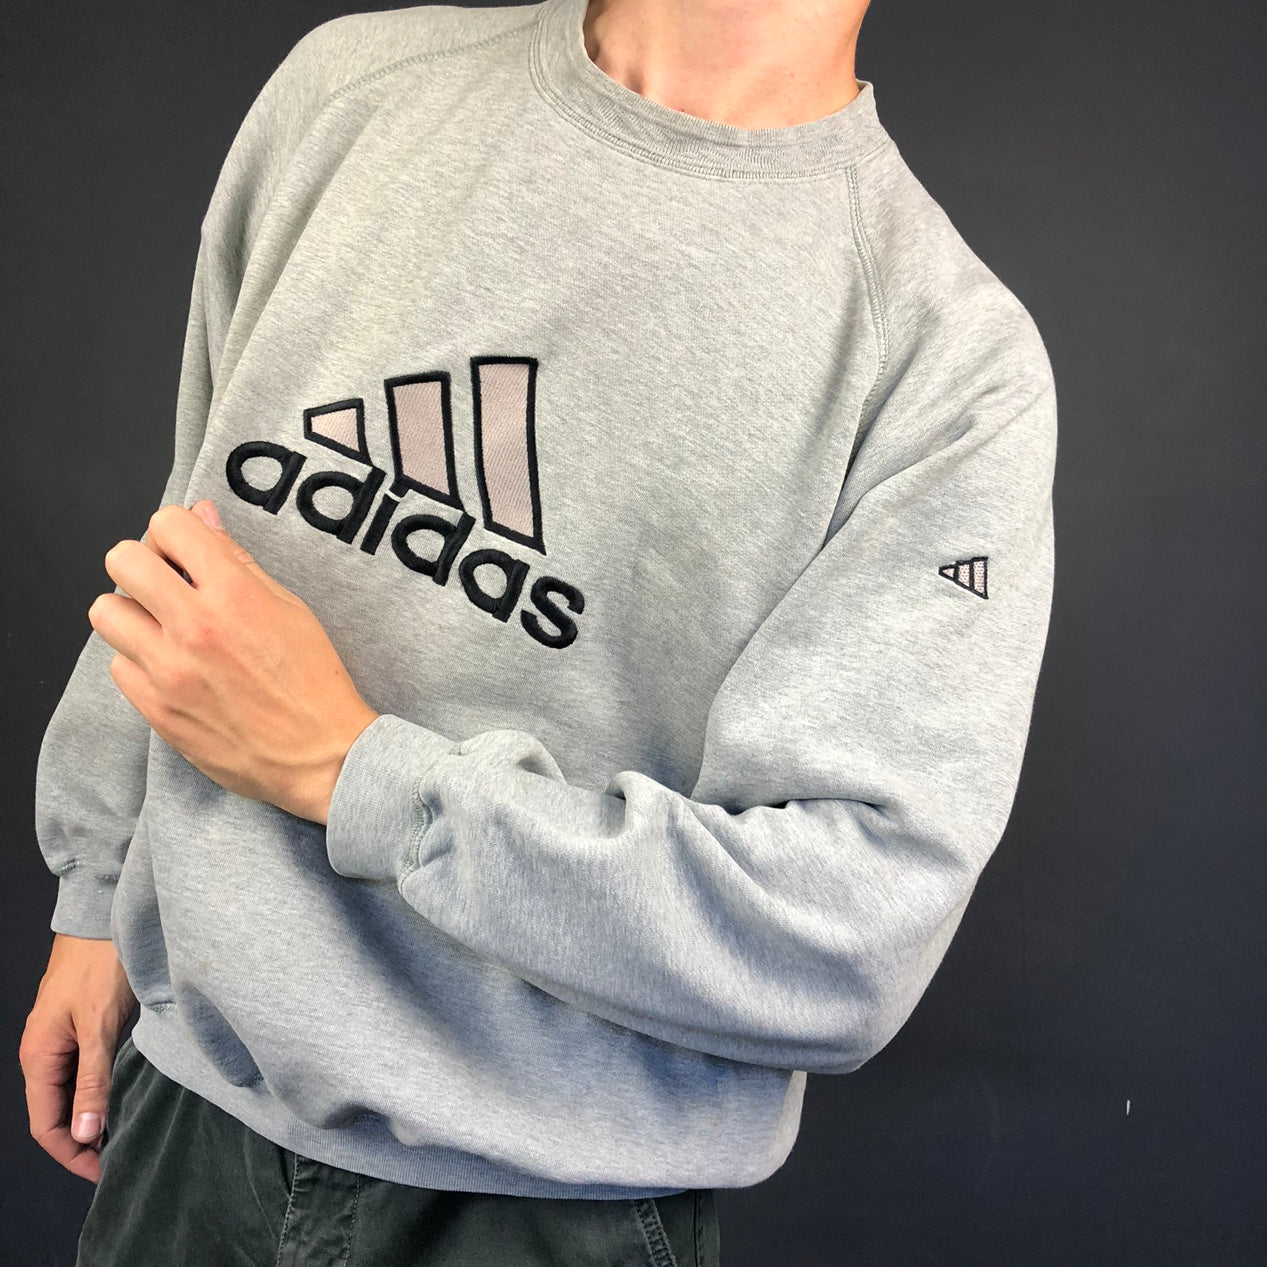 Vintage Adidas Spellout Sweatshirt with Embroidered Spellout - Large/XL